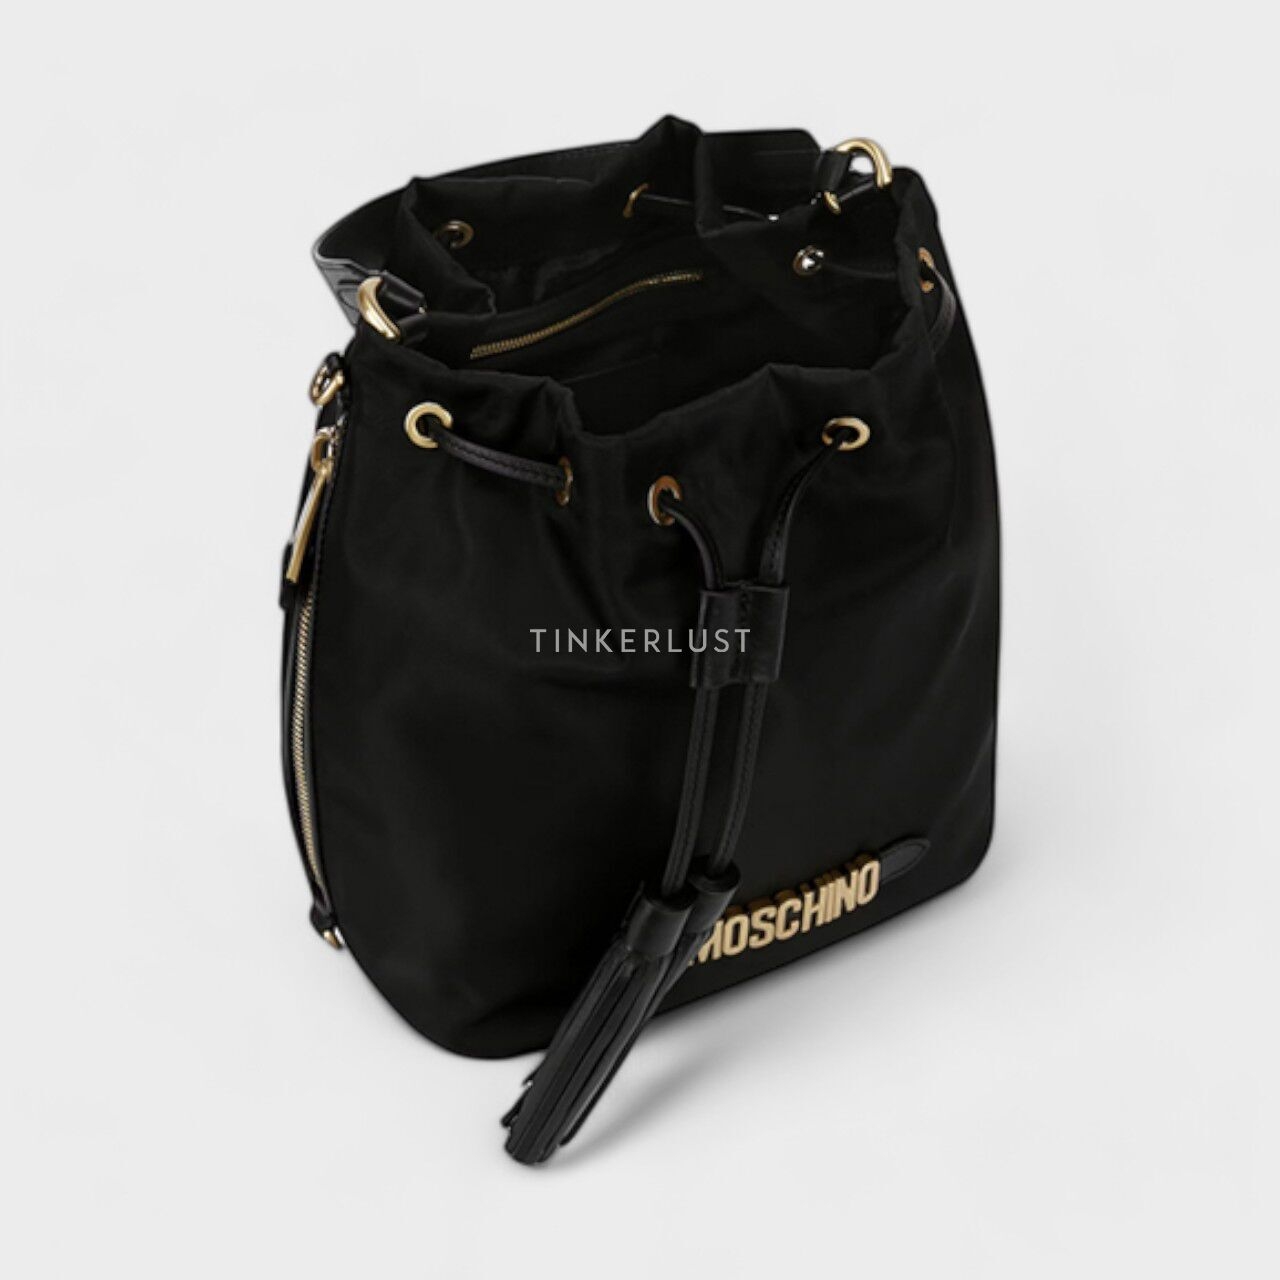 Moschino Small Lettering Logo Bucket Bag in Black with Tassels Satchel